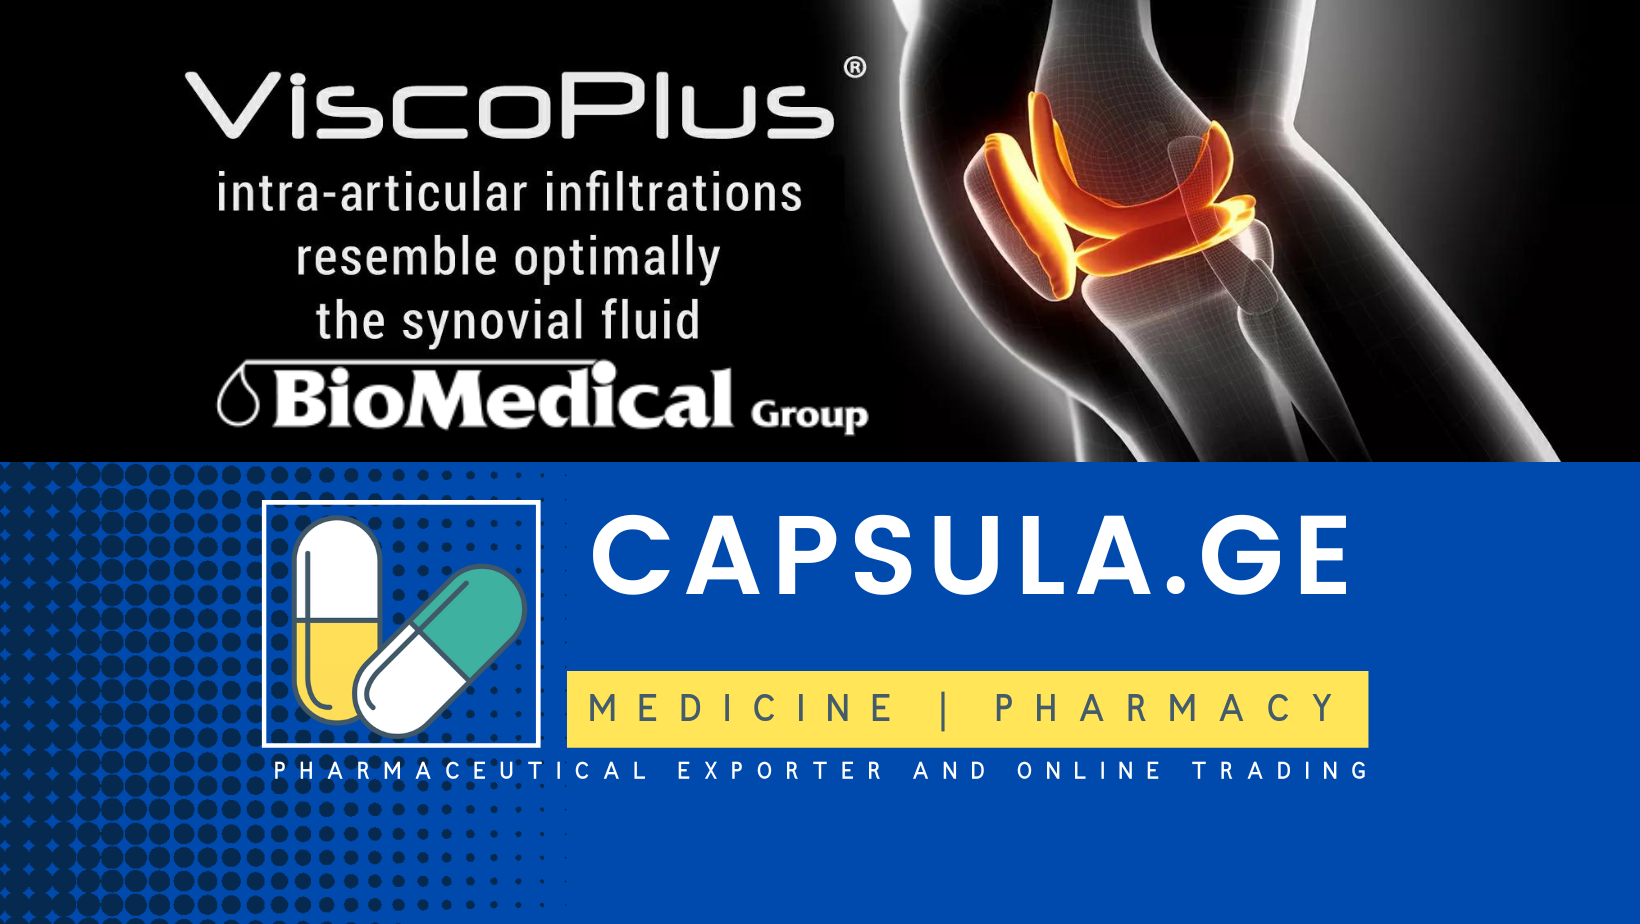 ViscoPlus BioMedical Group - Experts in Hyaluronic Acids for joint health, aesthetics and ophthalmology